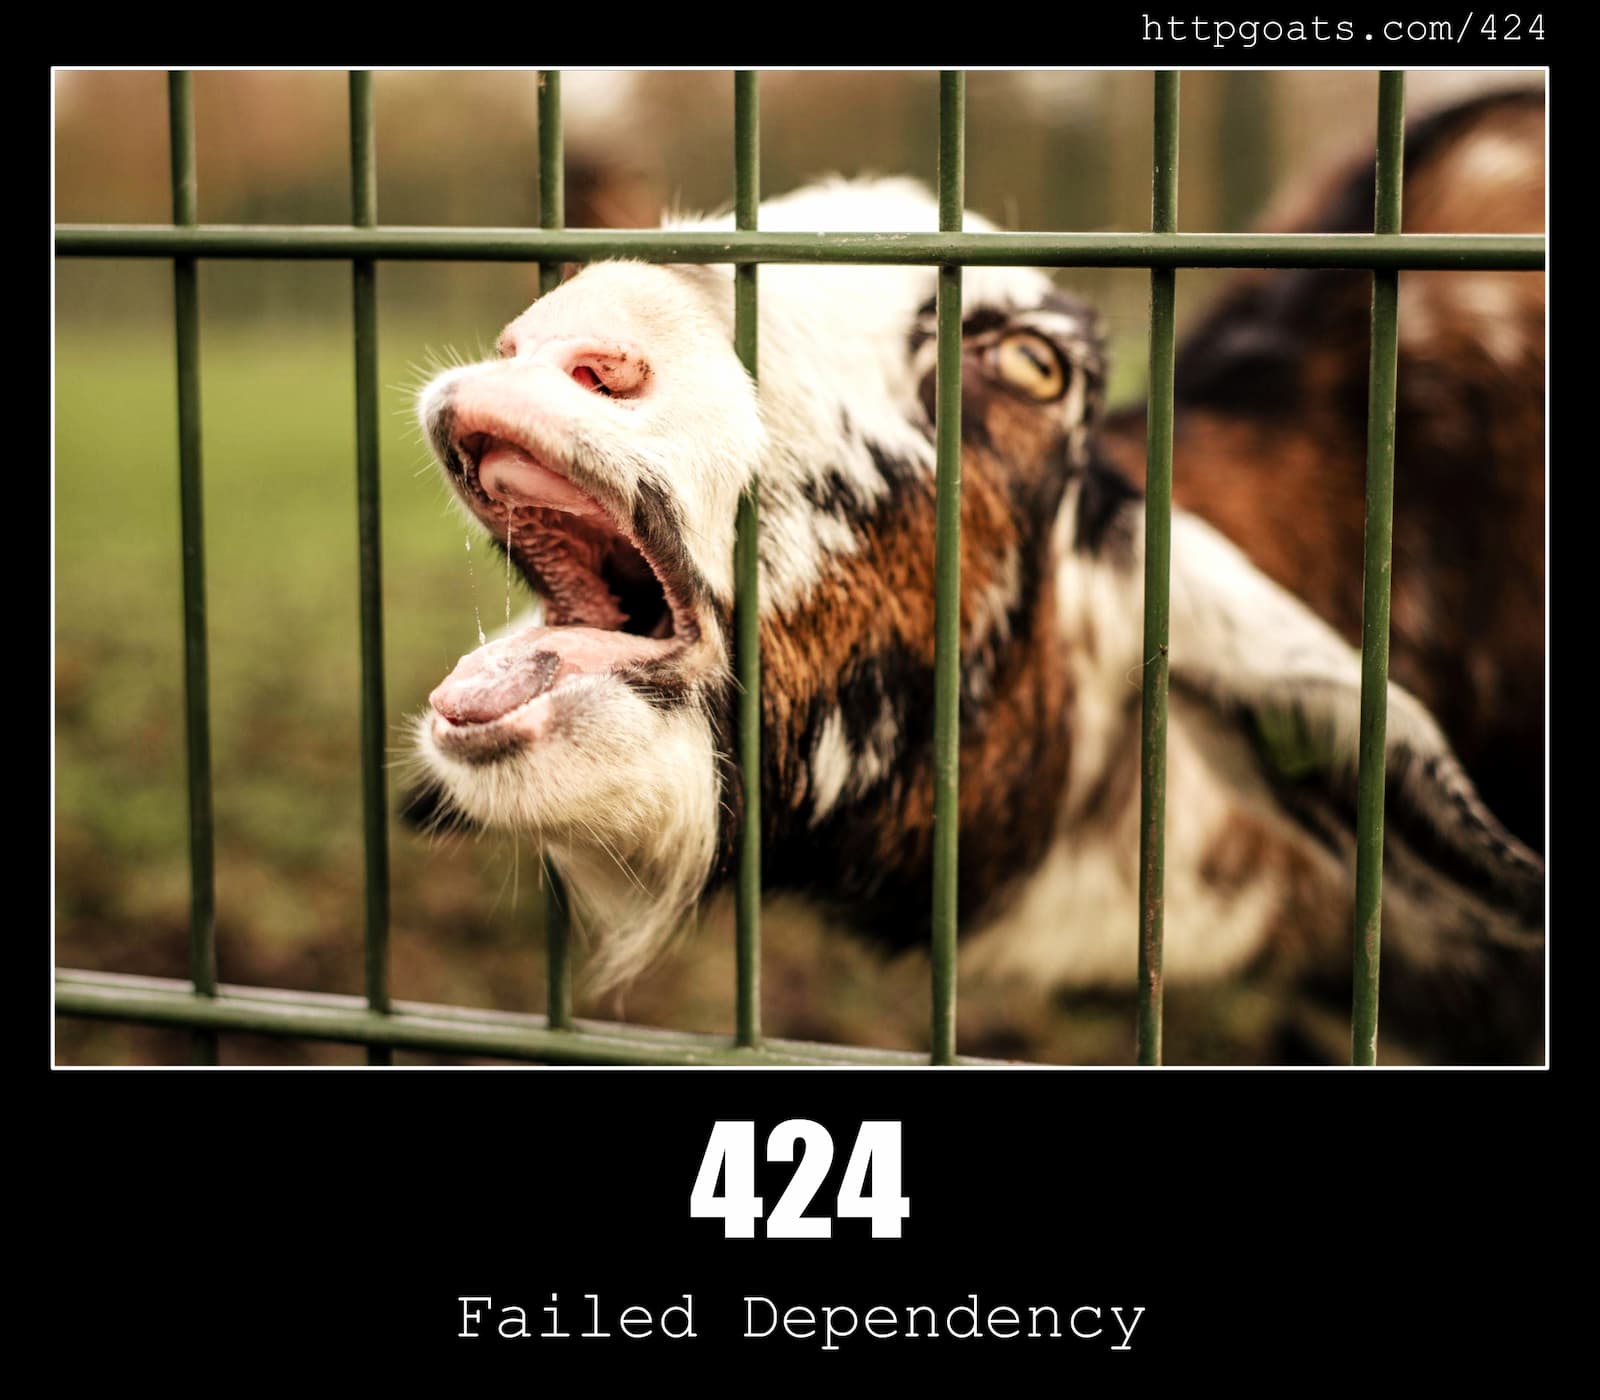 HTTP Status Code 424 Failed Dependency & Goats